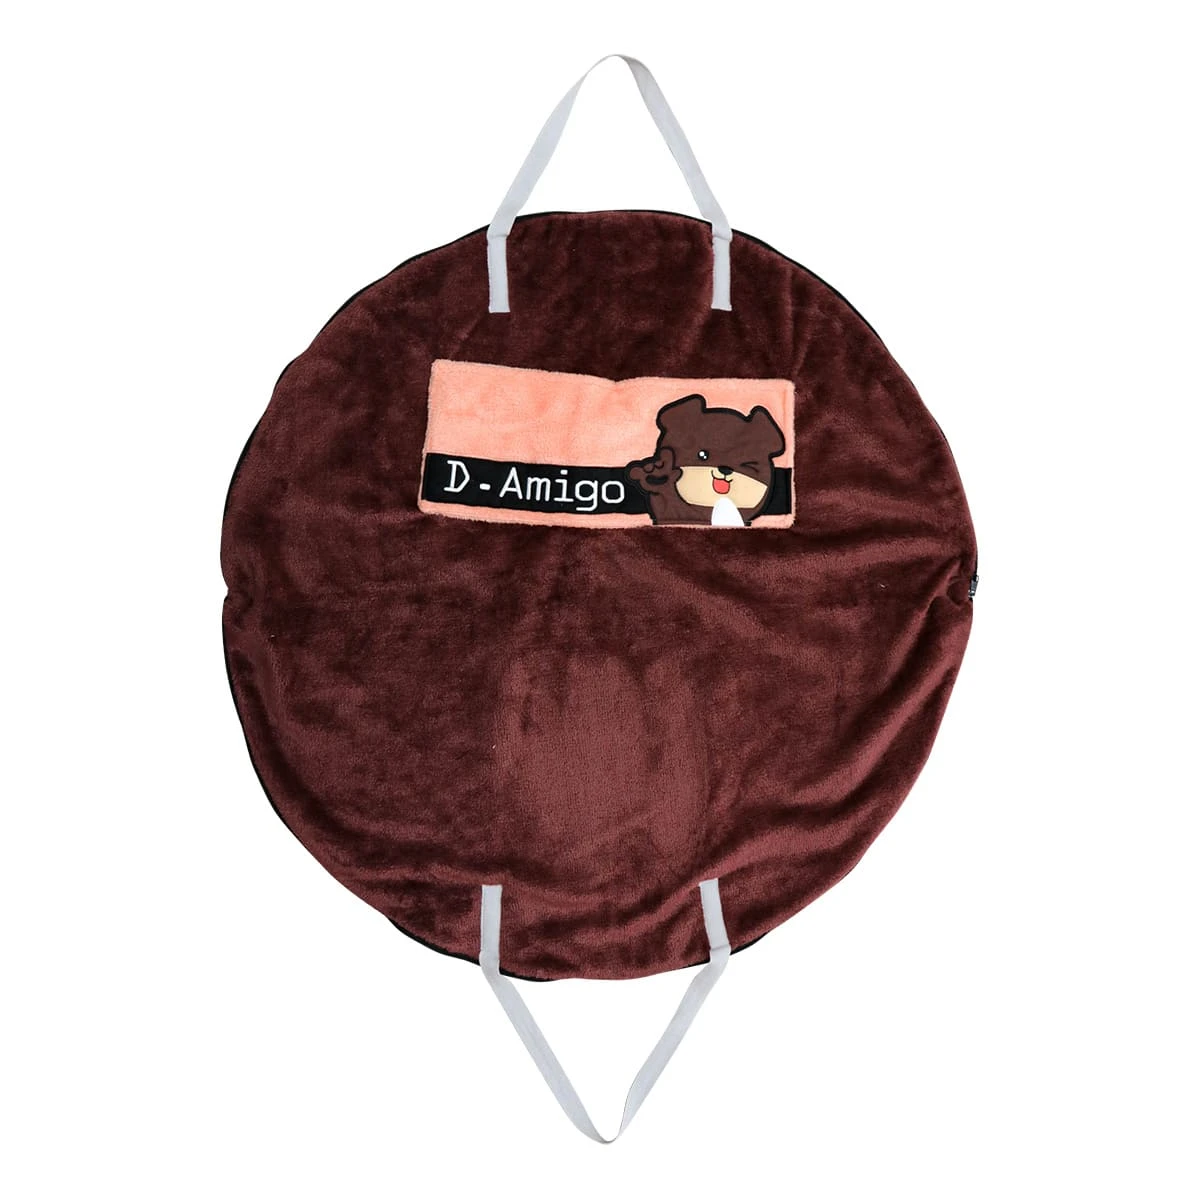 Ton Embroidery Pocket Semi Circle Shape Carry-on Bag with Plush Blanket (Red Brown)